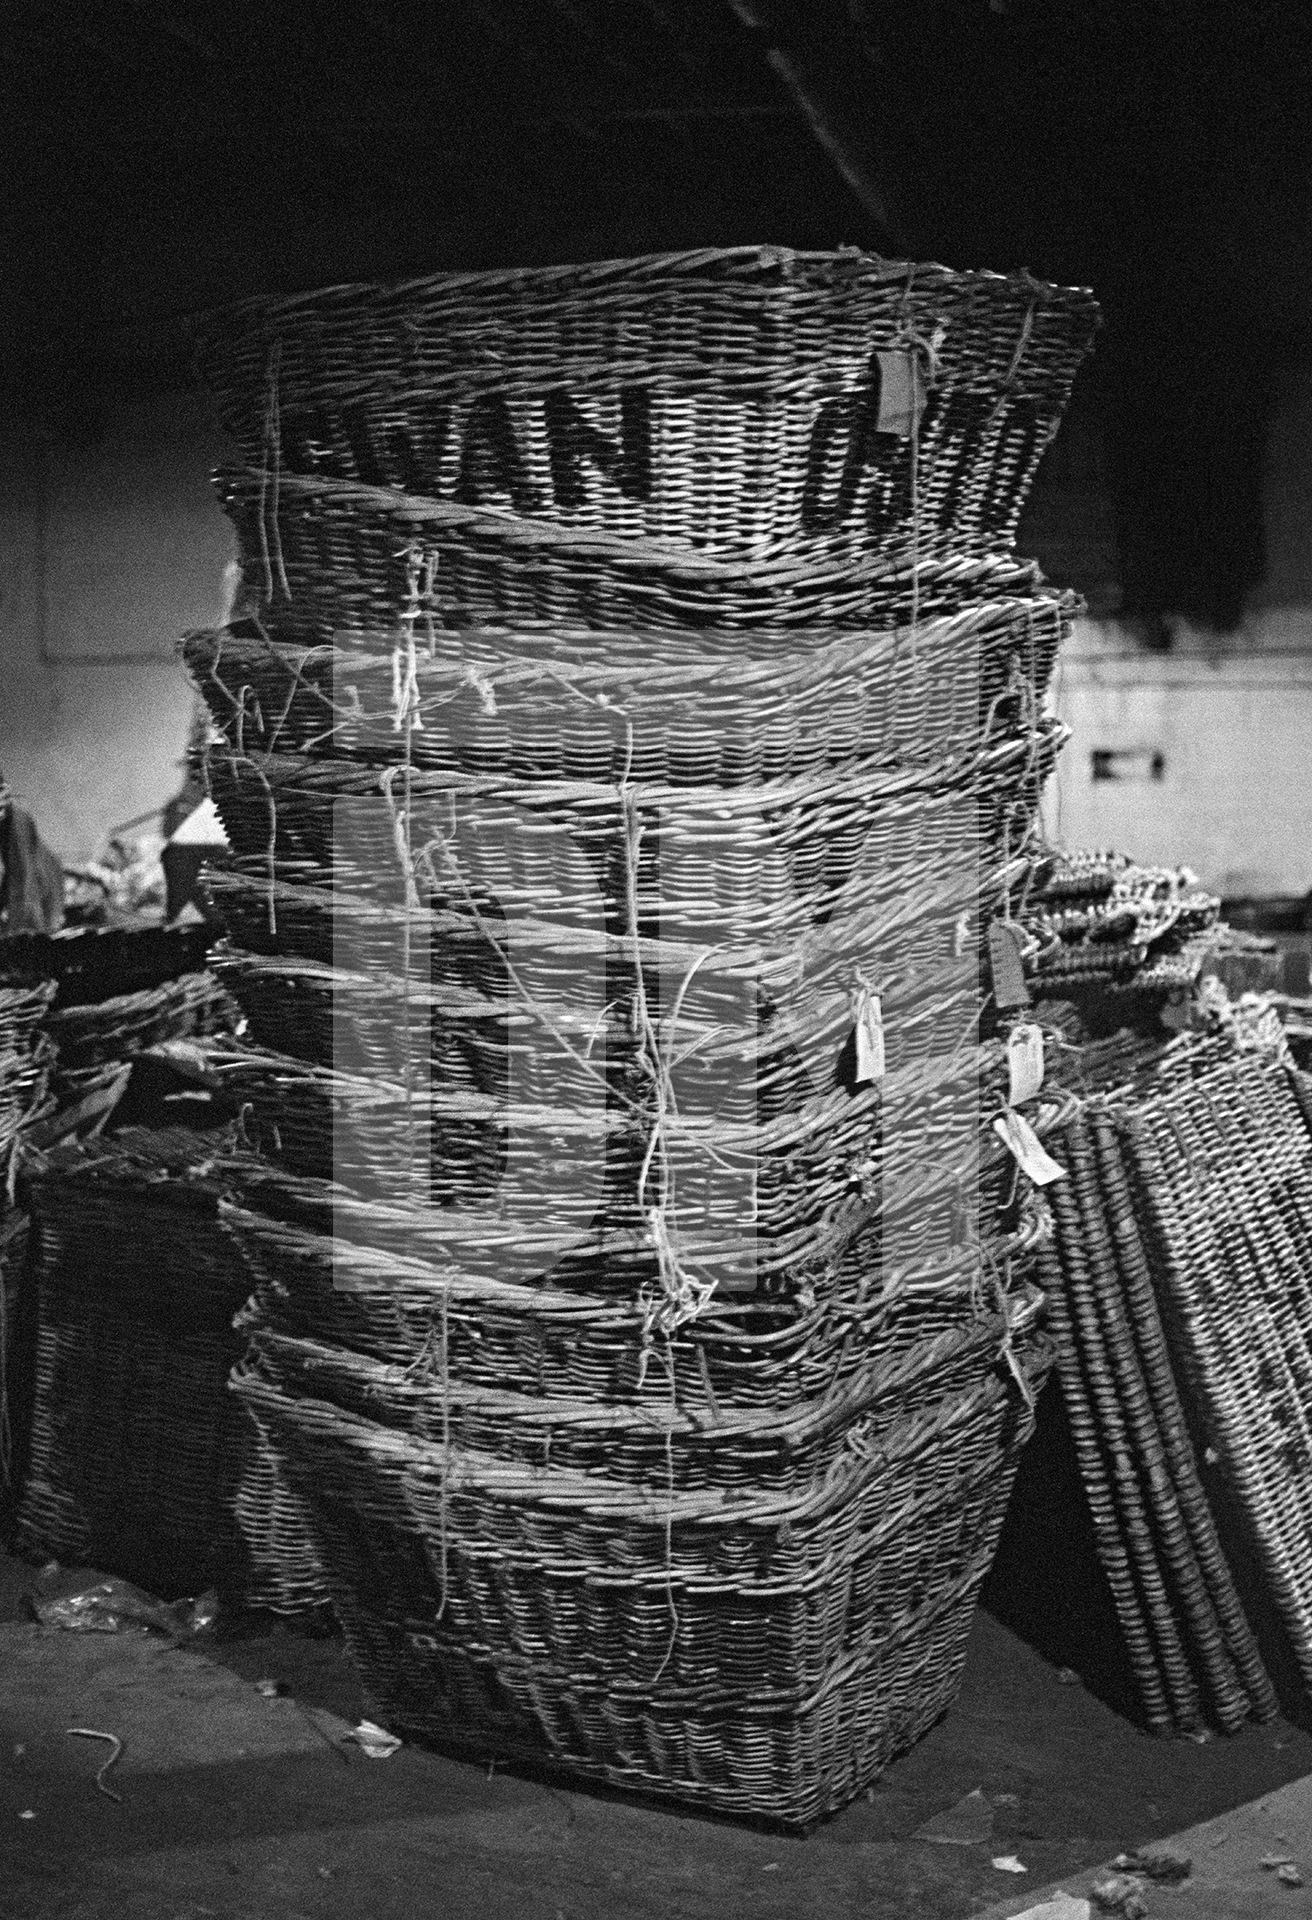 In the warehouse, stack of empty yarn skeps. January 1977 by Daniel Meadows